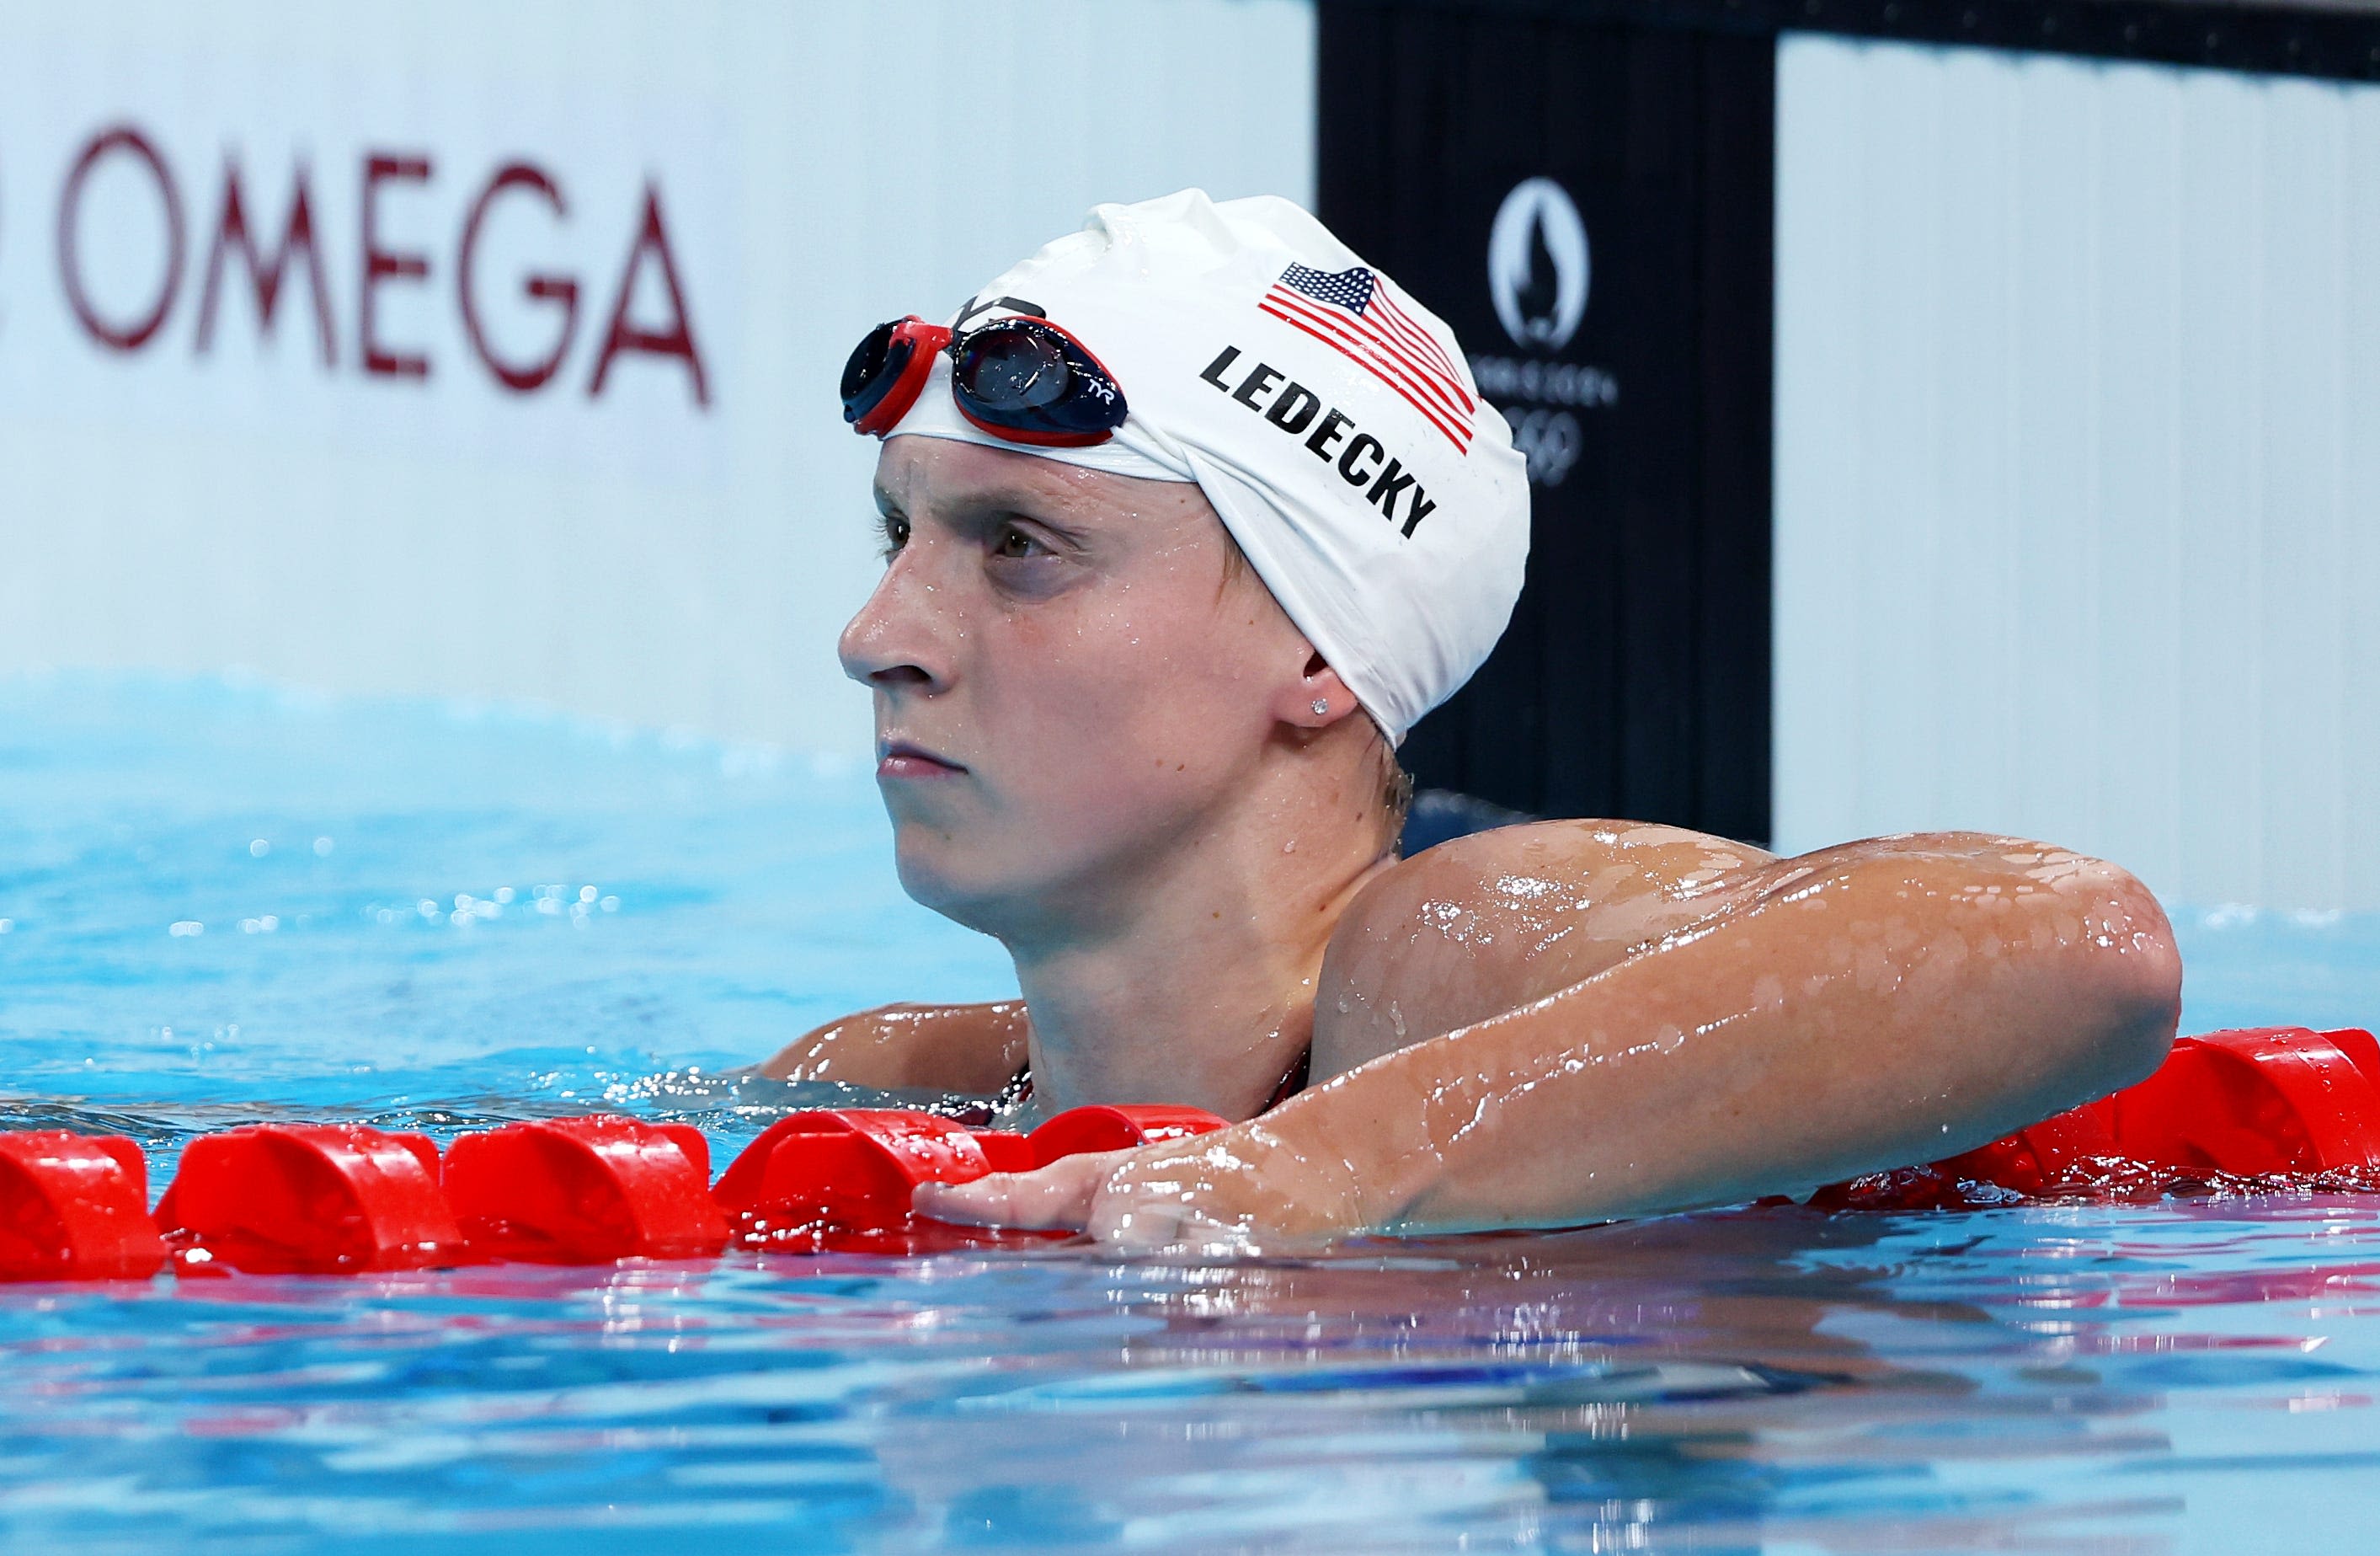 Katie Ledecky wins gold medal in 1,500-meter freestyle, adds to Olympic tally